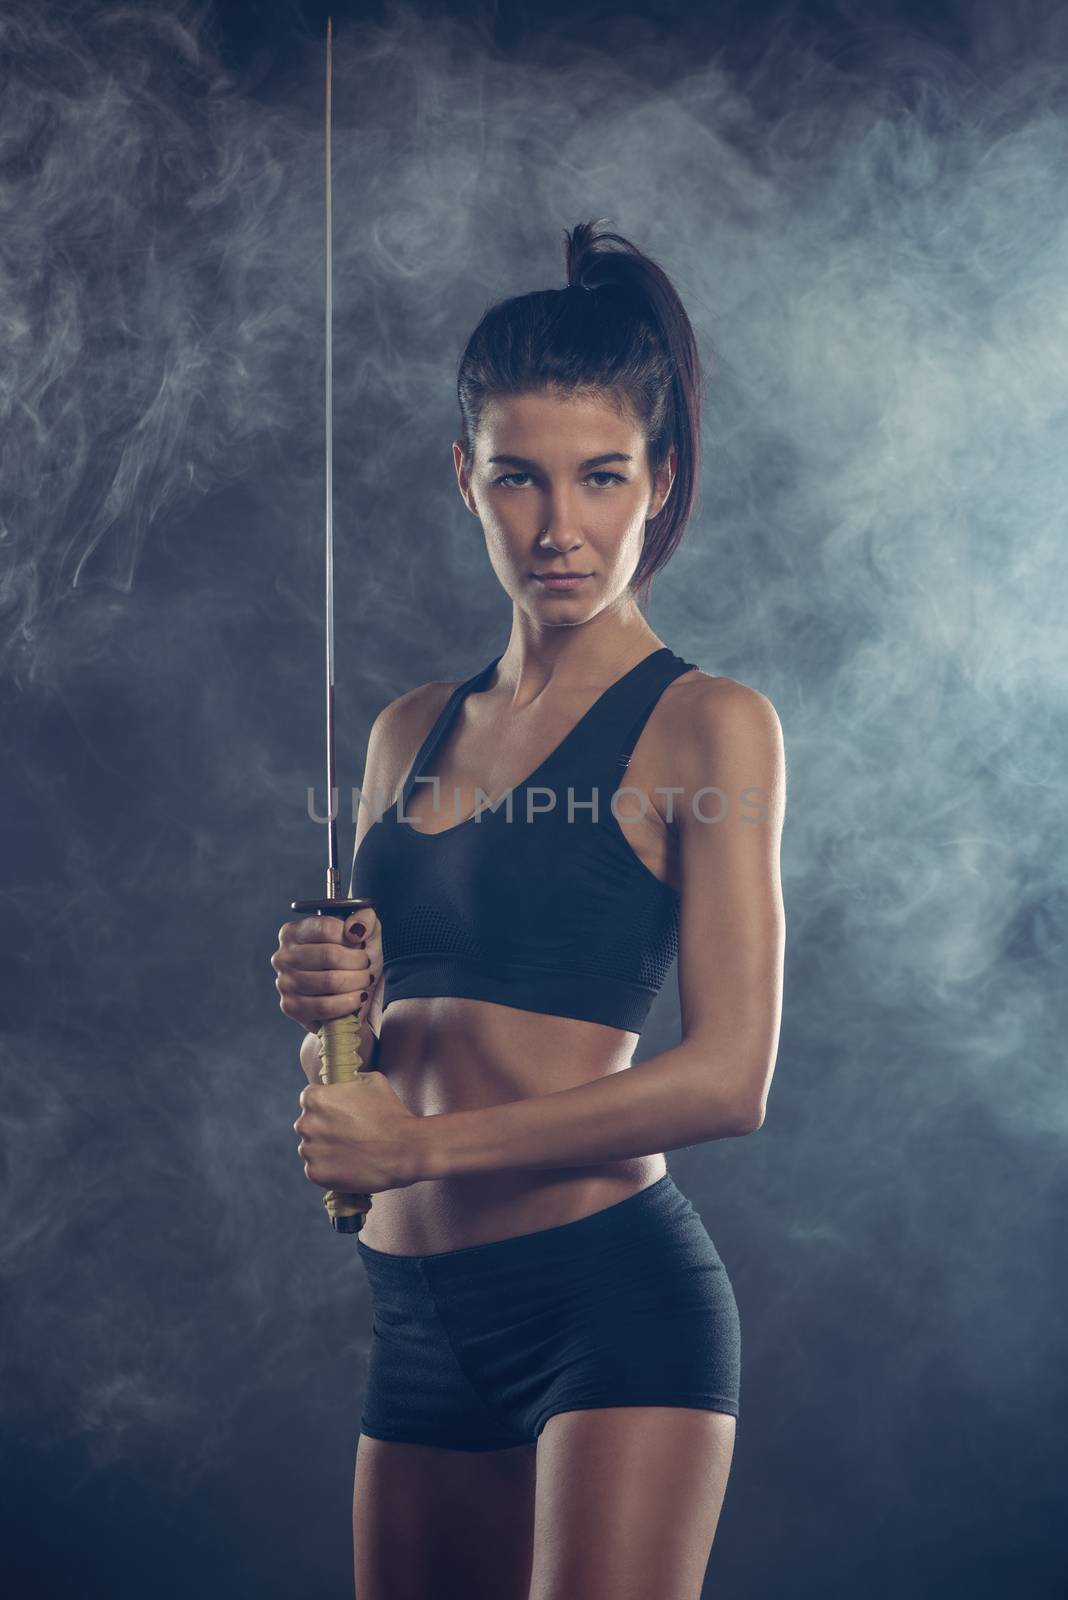 Portrait of a  beautiful young woman with sword and with a serious expression on her face looking at the camera. Dark background.